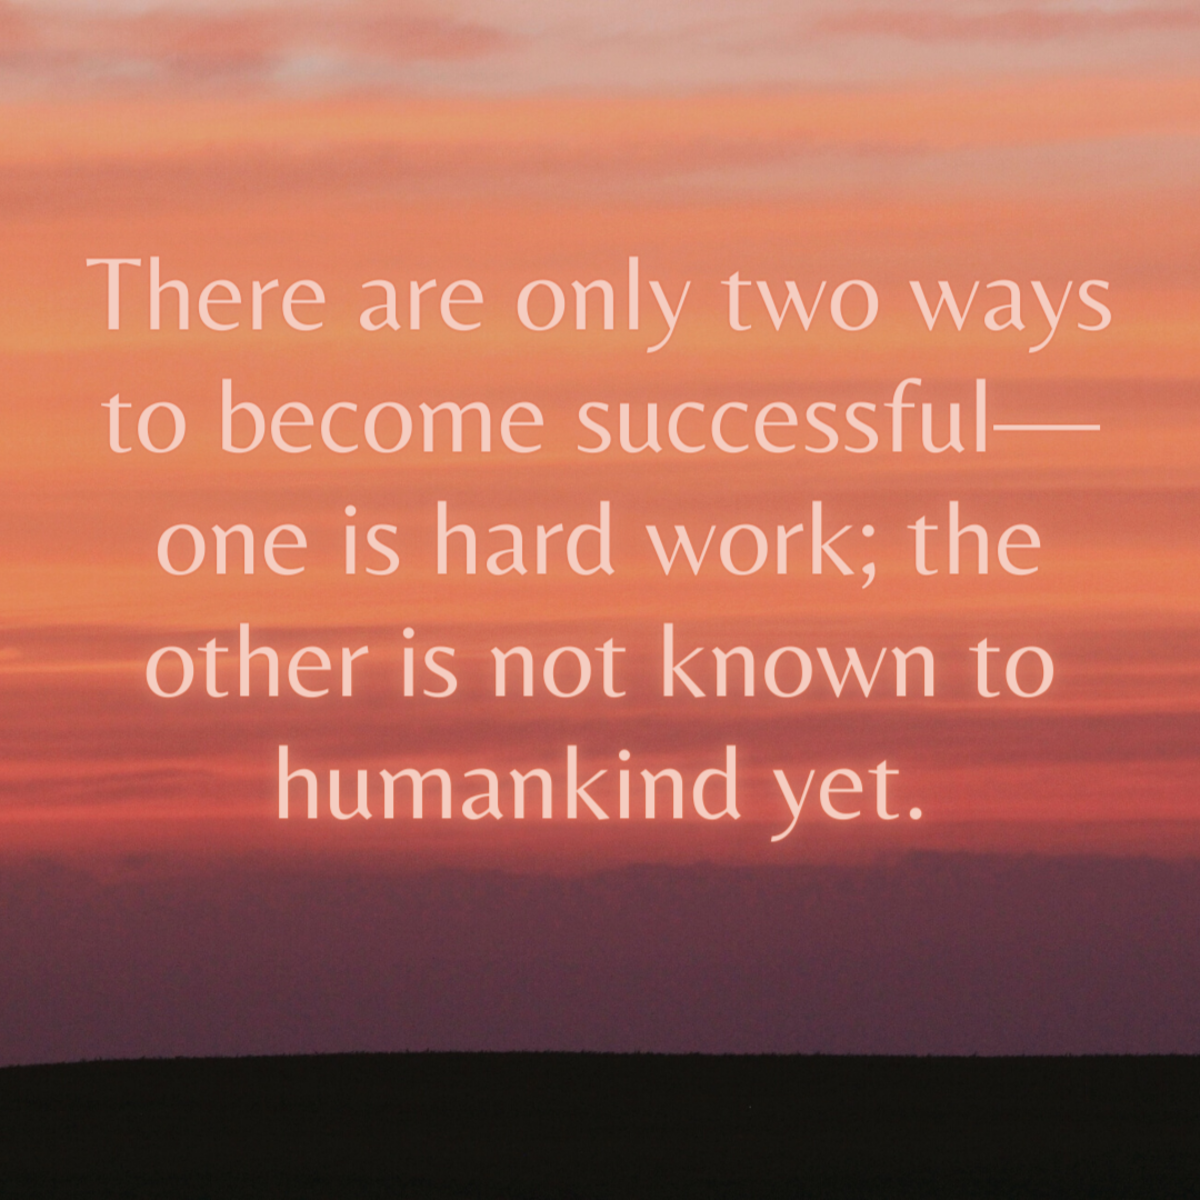 Hard work is the only known way to achieve success!